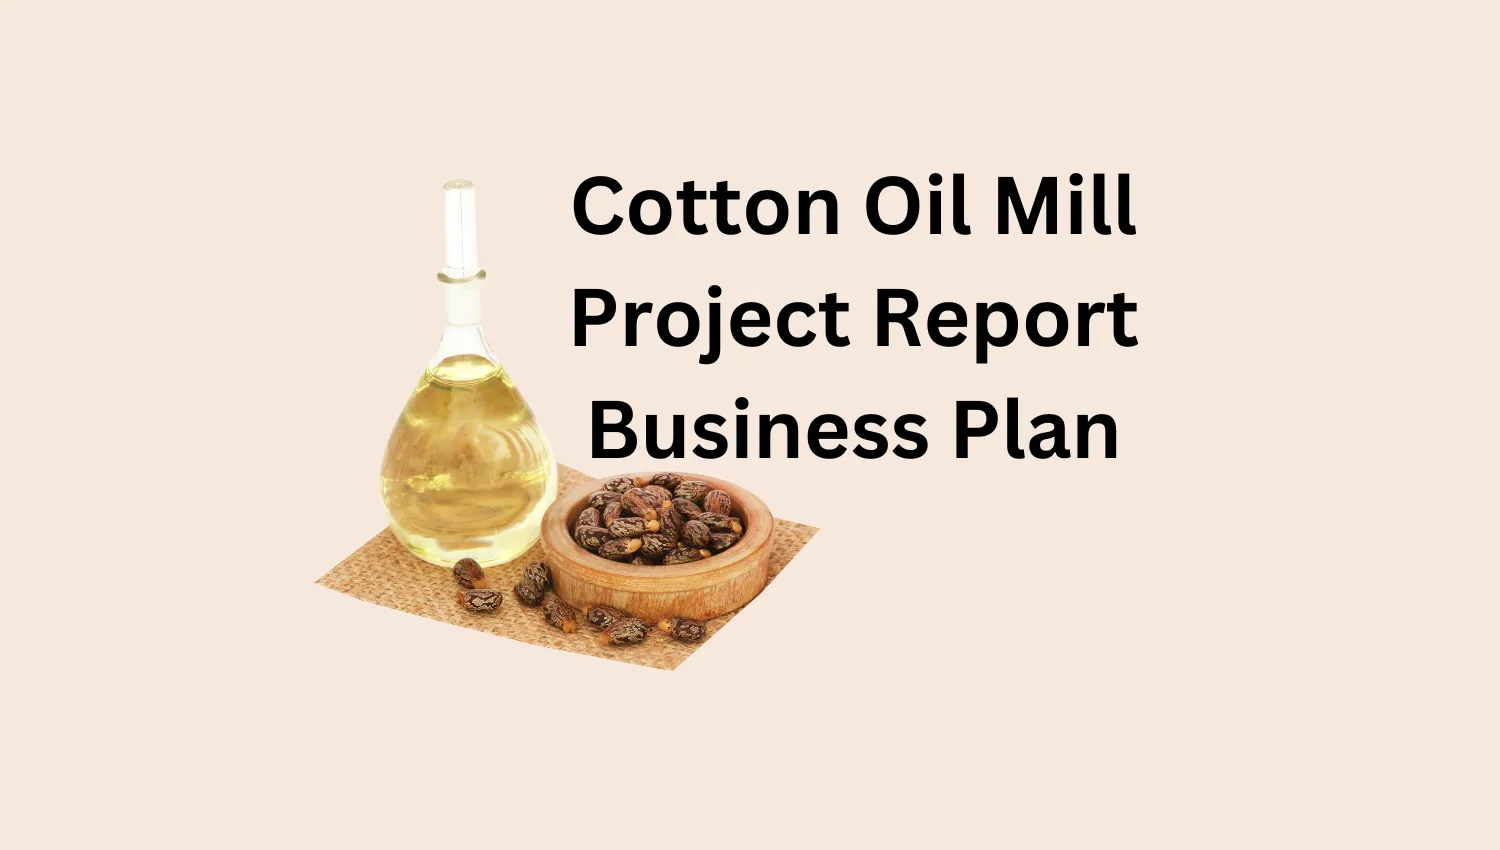 Cotton Oil Mill Project Report and Business Plan for Bank Loan in India